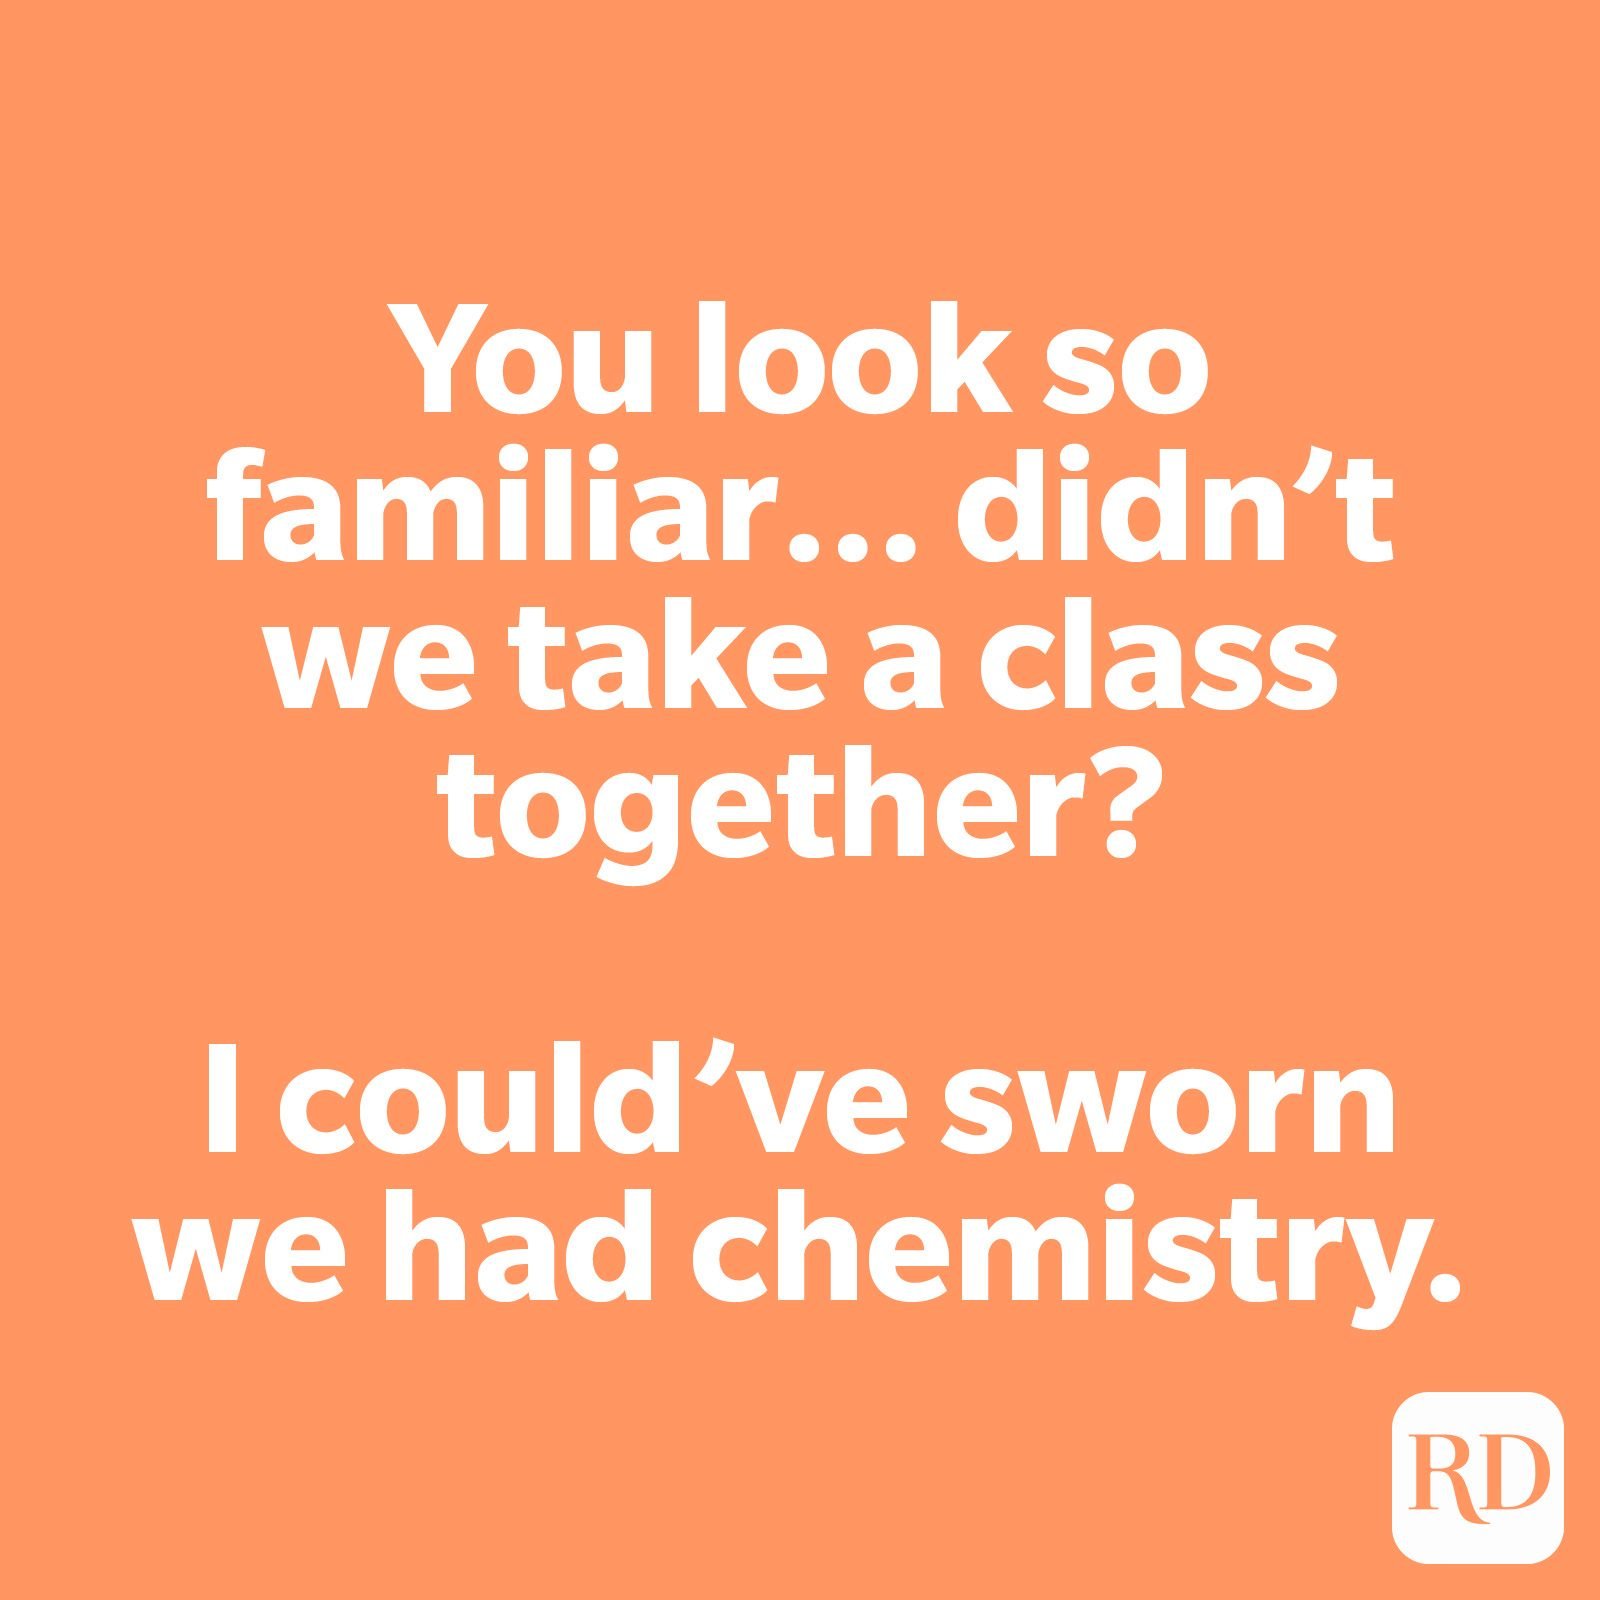 Pick Up Lines That Make Women Laugh – 45 of the Best Ones